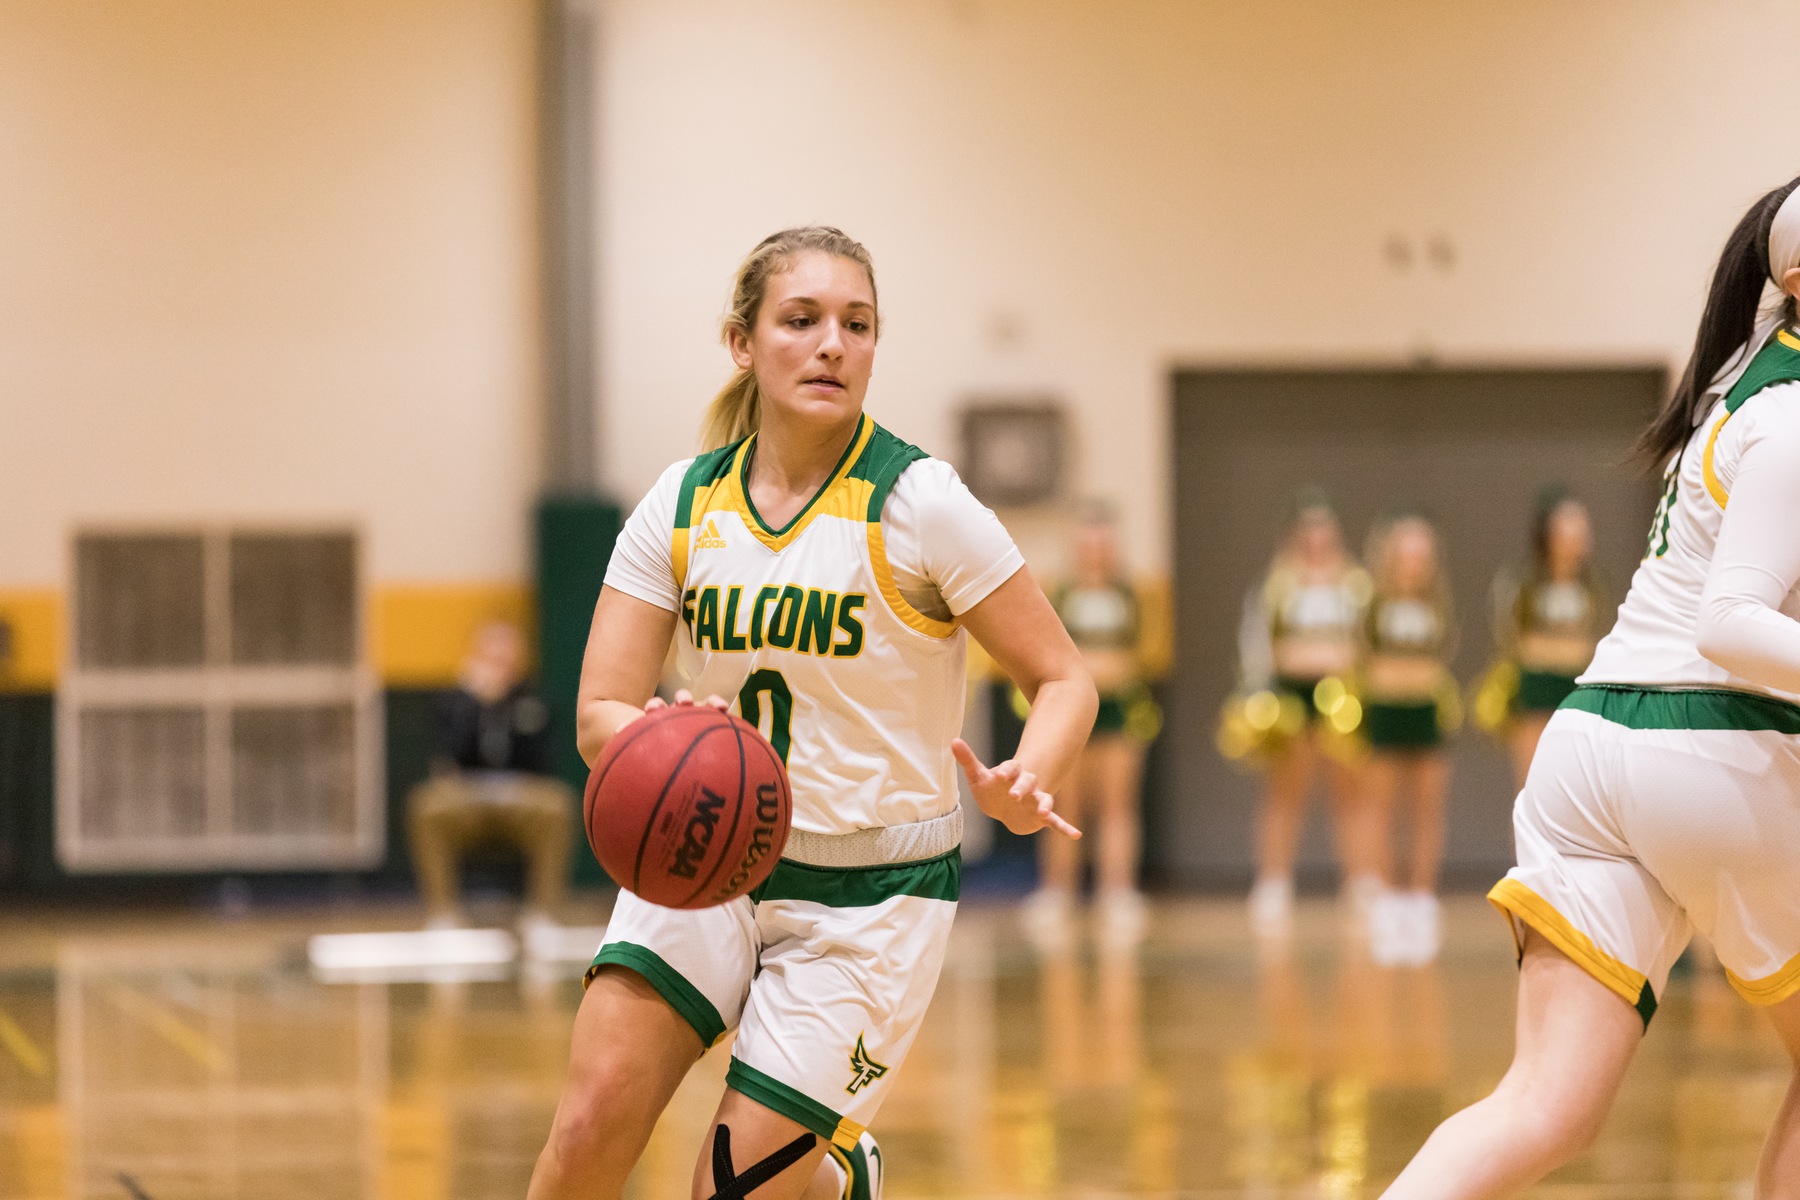 Falcons Fall To Lancers, 64-44